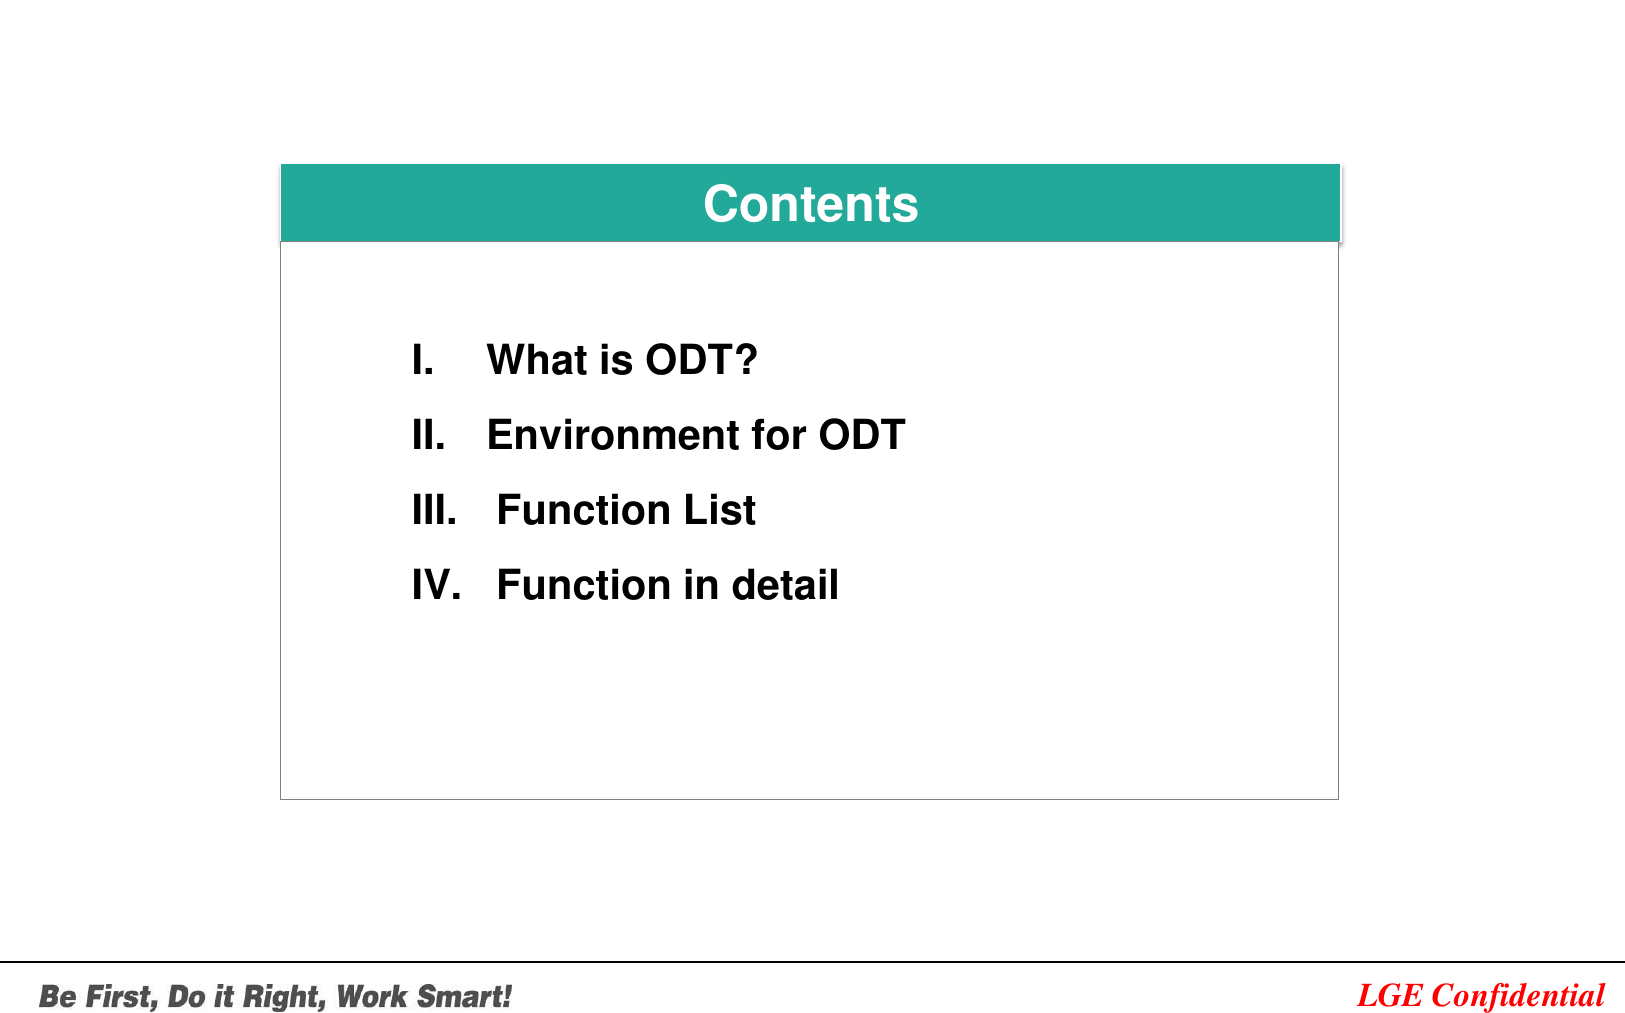 LGE ConfidentialContentsI. What is ODT?II. Environment for ODTIII. Function ListIV. Function in detail